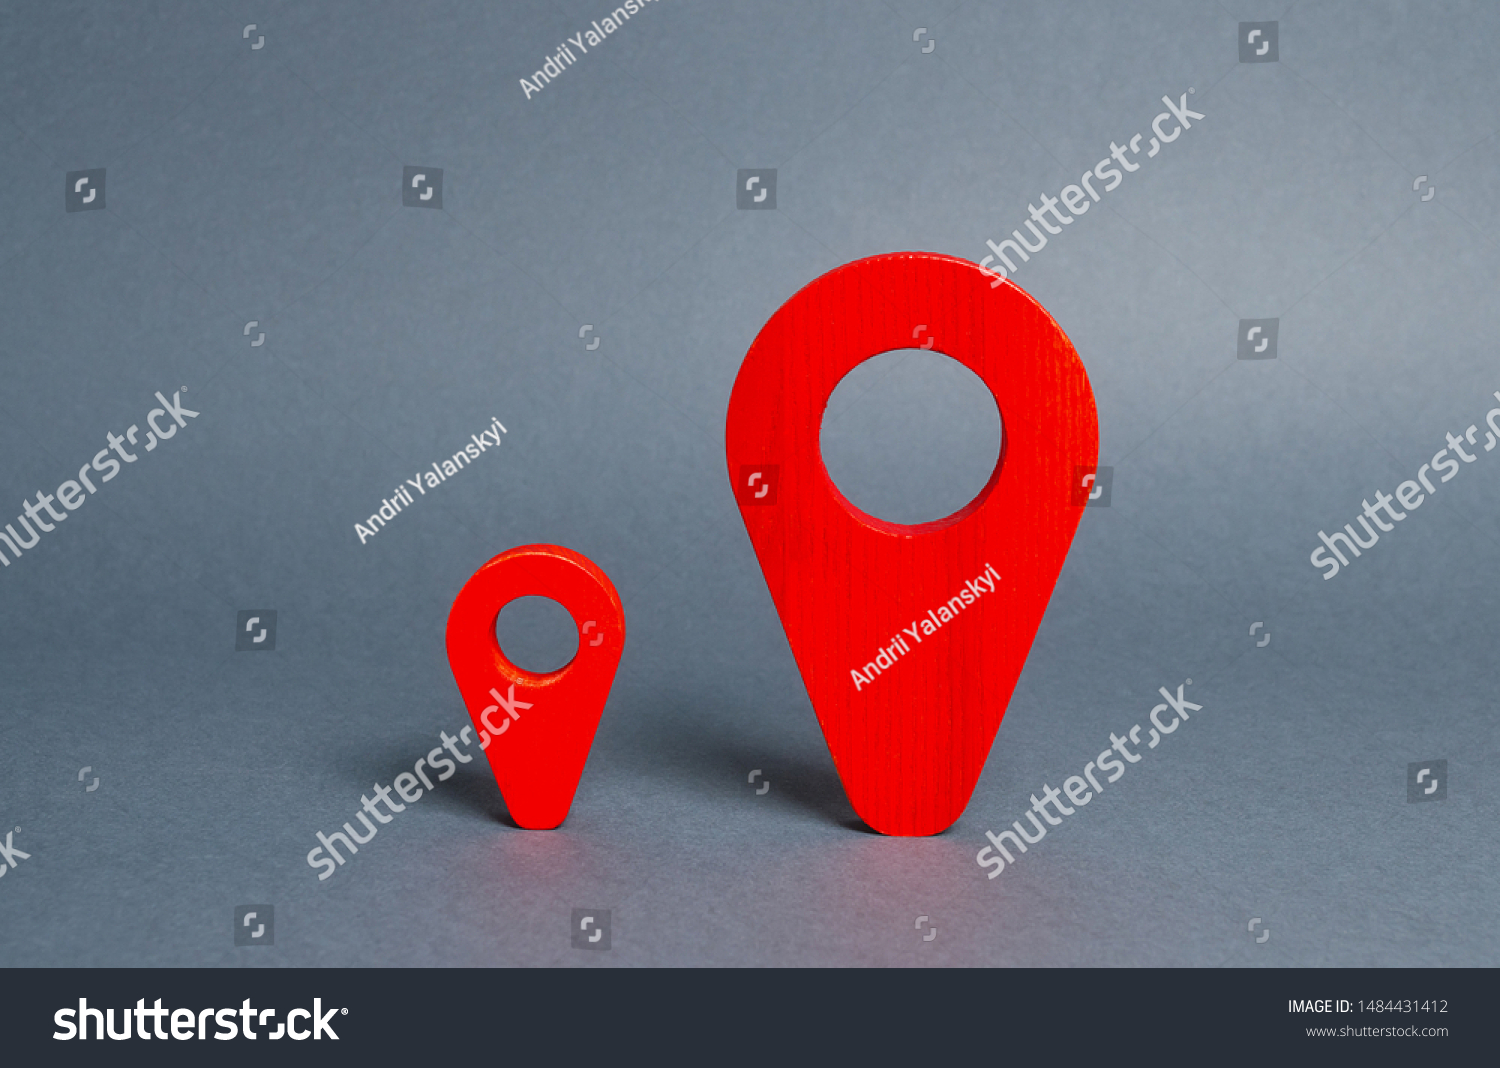 Small and large red navigational location indicators. The concept of a more significant and popular place. Competition. Arrival Point Measure distance and build a route. #1484431412